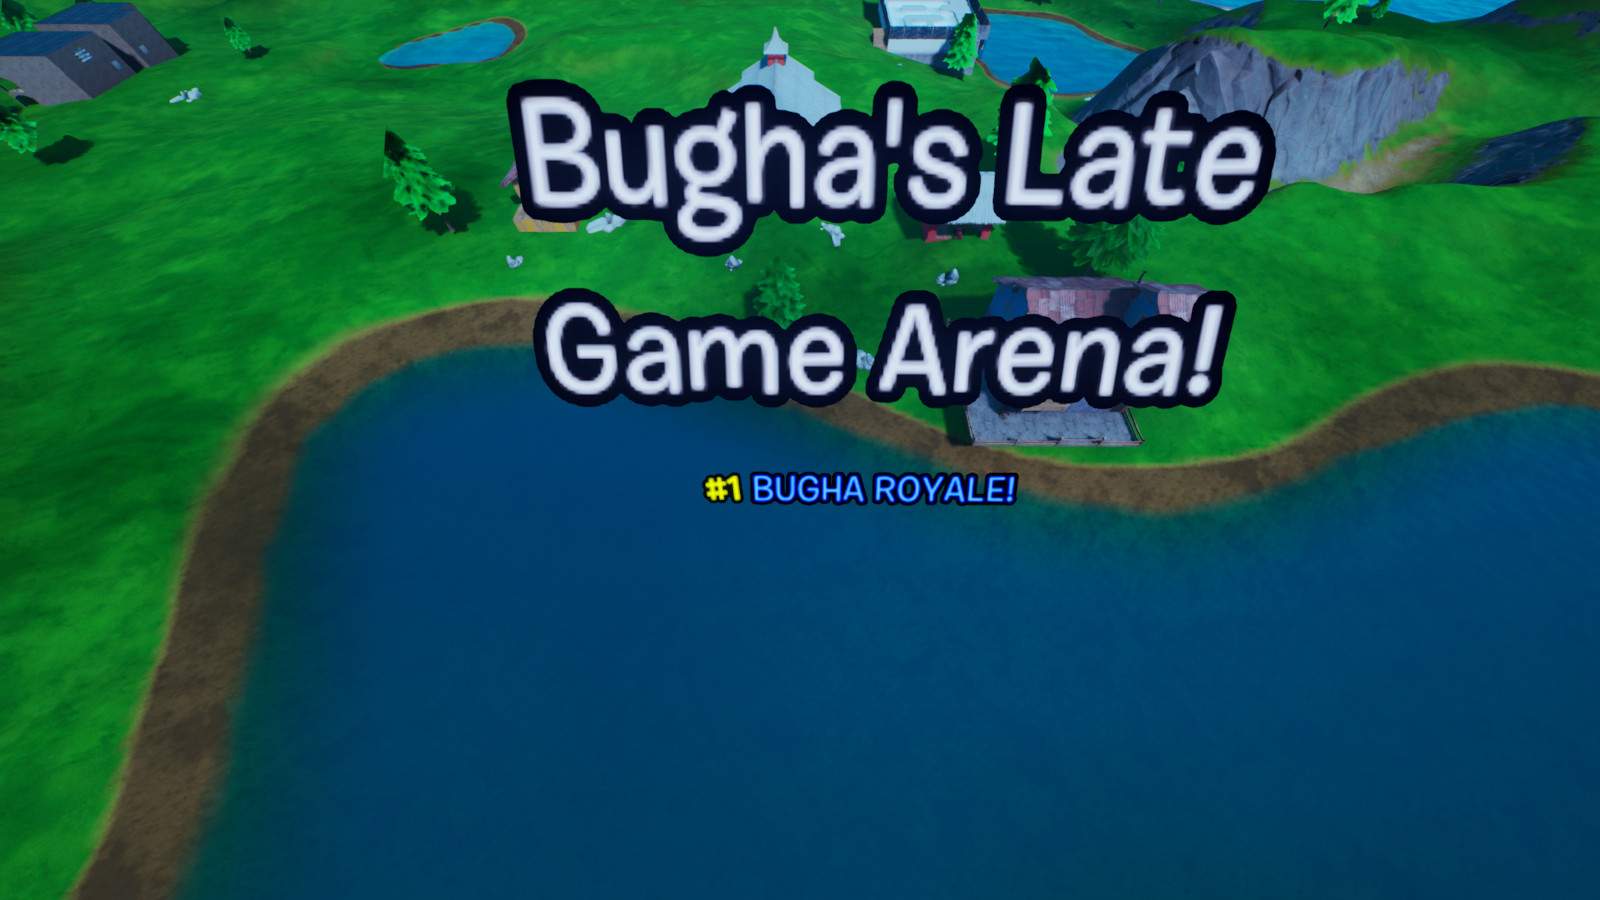 BUGHA'S LATE GAME ARENA